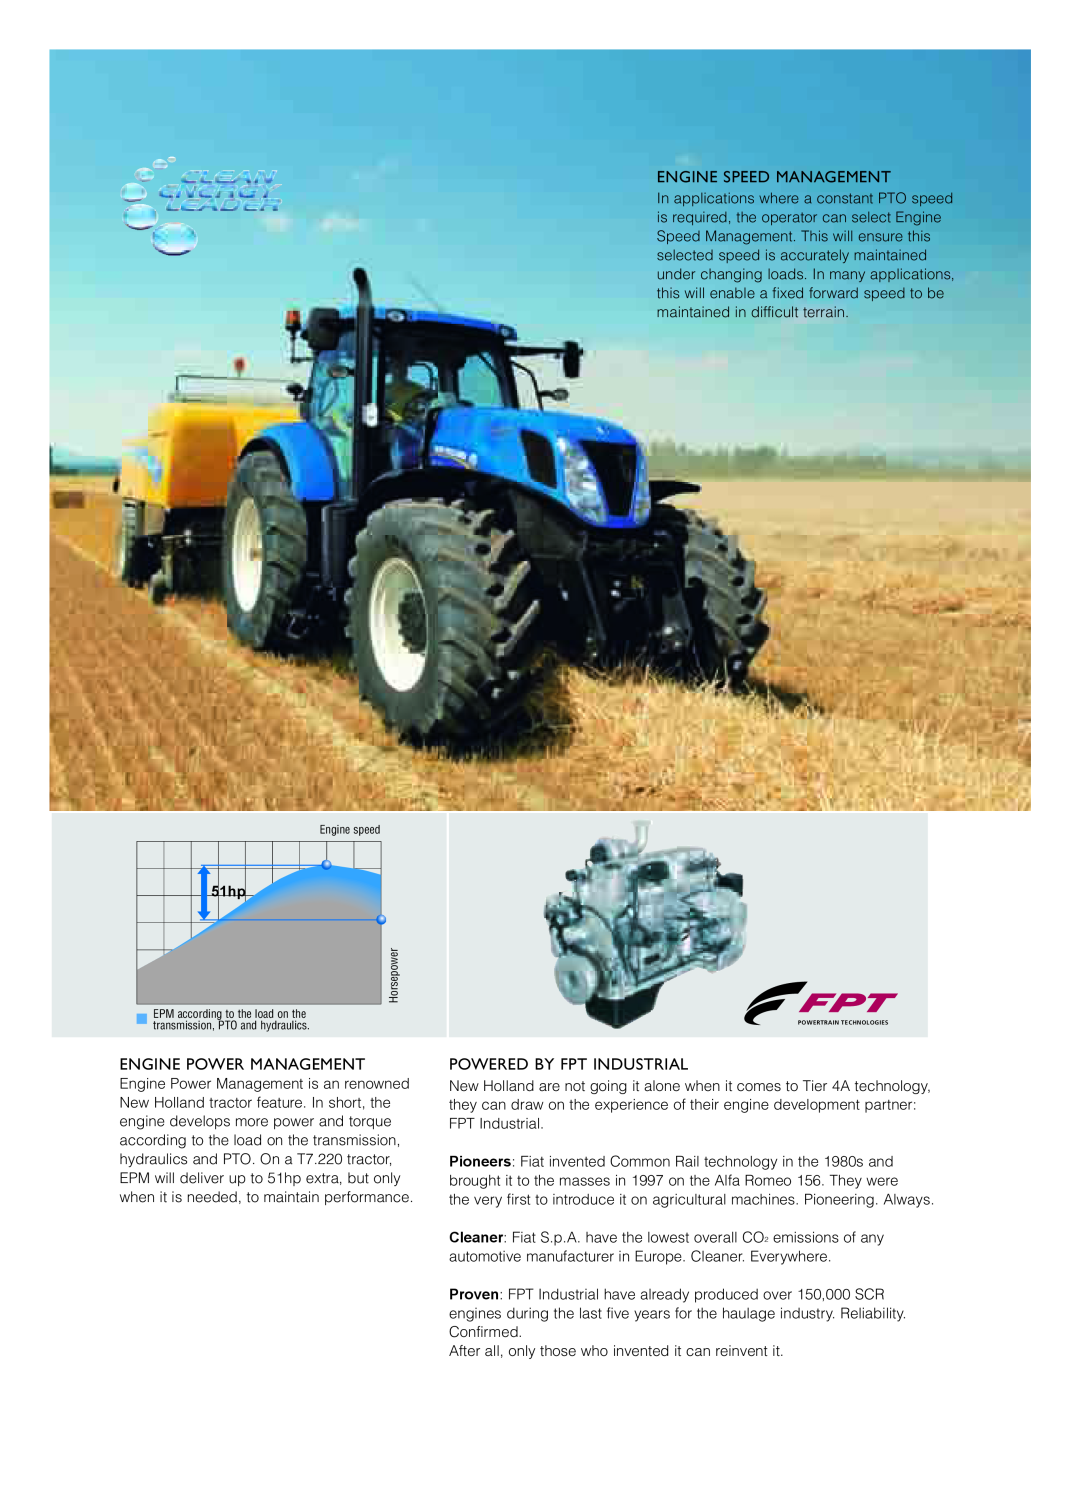 New Holland T7.235, T7.270, T7.260, T7.185 Engine Speed Management, Engine Power Management, Powered By Fpt Industrial, 51hp 